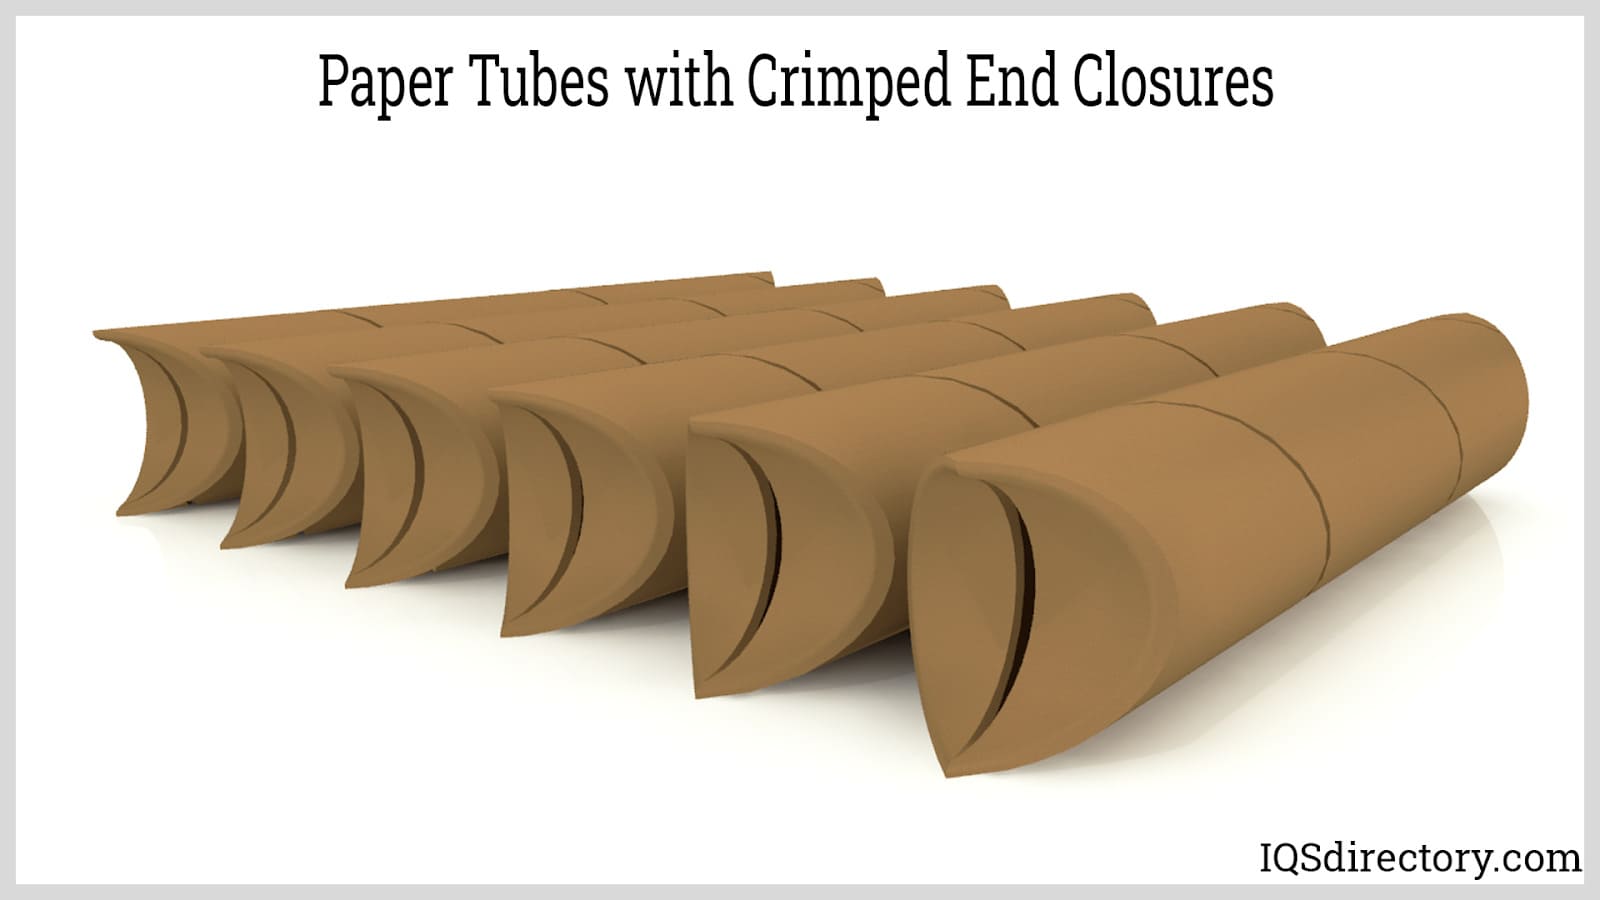 Paper Tubes with Crimped End Closures